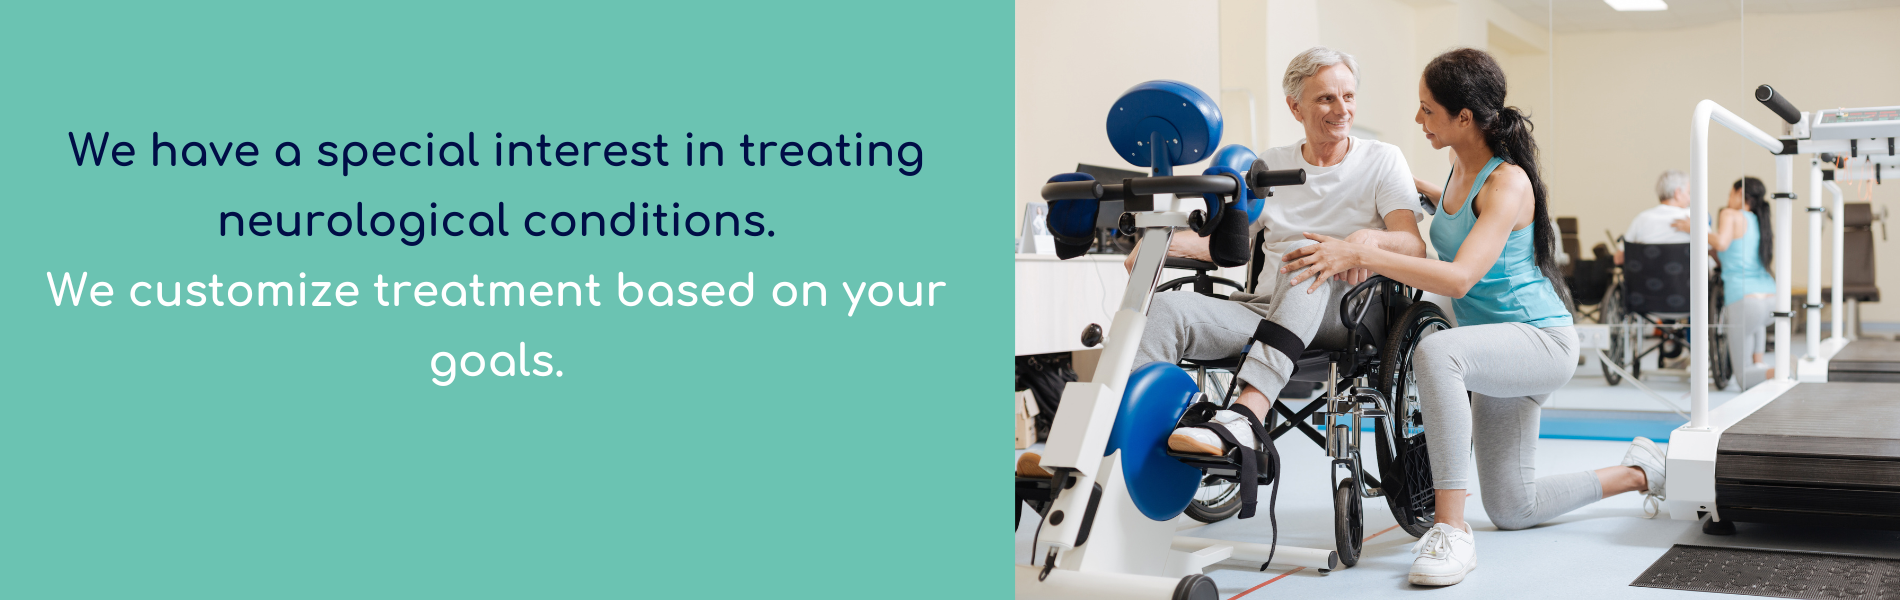 Are you not able to access out-patient physiotherapy because of mobility issues We offer evidence-based assessment and treatment at your home or via Virtual- Physiotherapy.